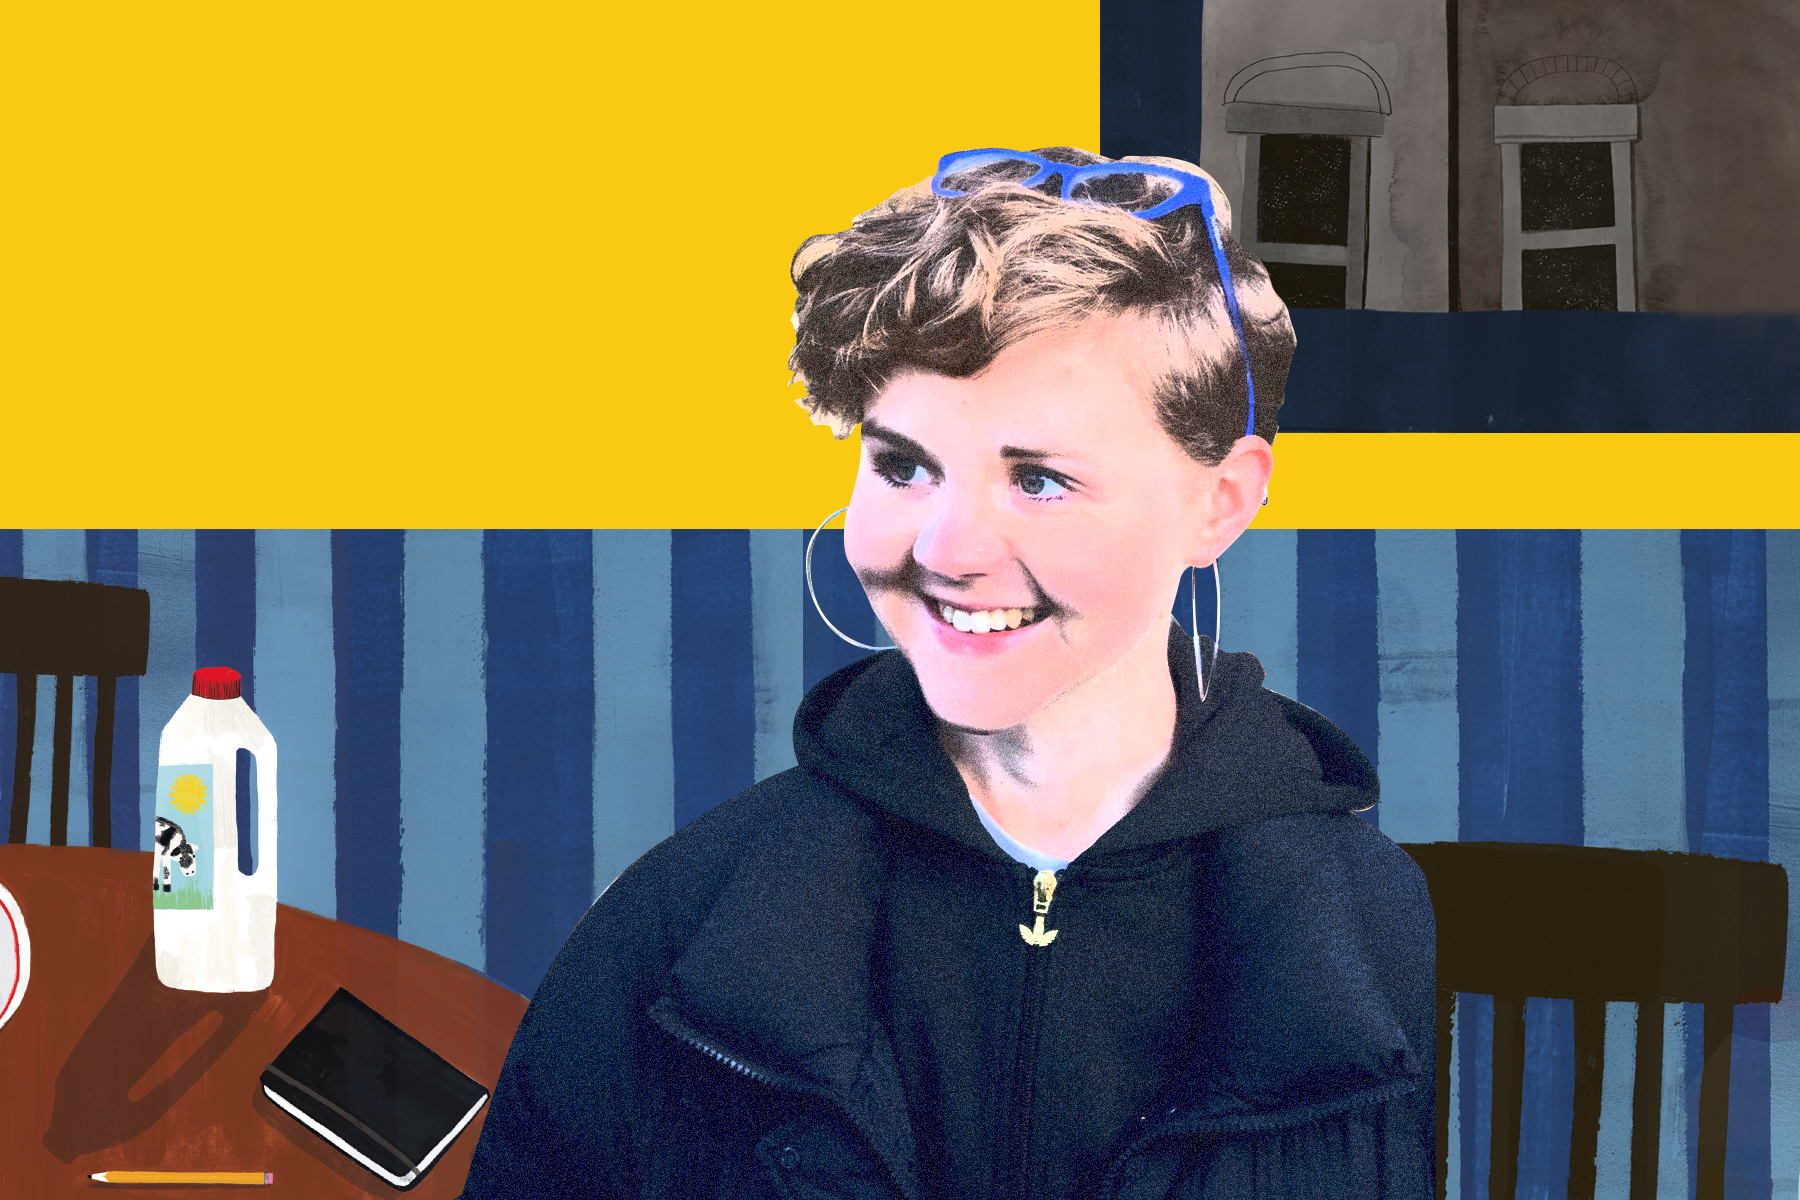 Stylised headshot of Anna Glendenning, superimposed into the bright collage-style kitchen scene from the jacket of An Experiment in Leisure.